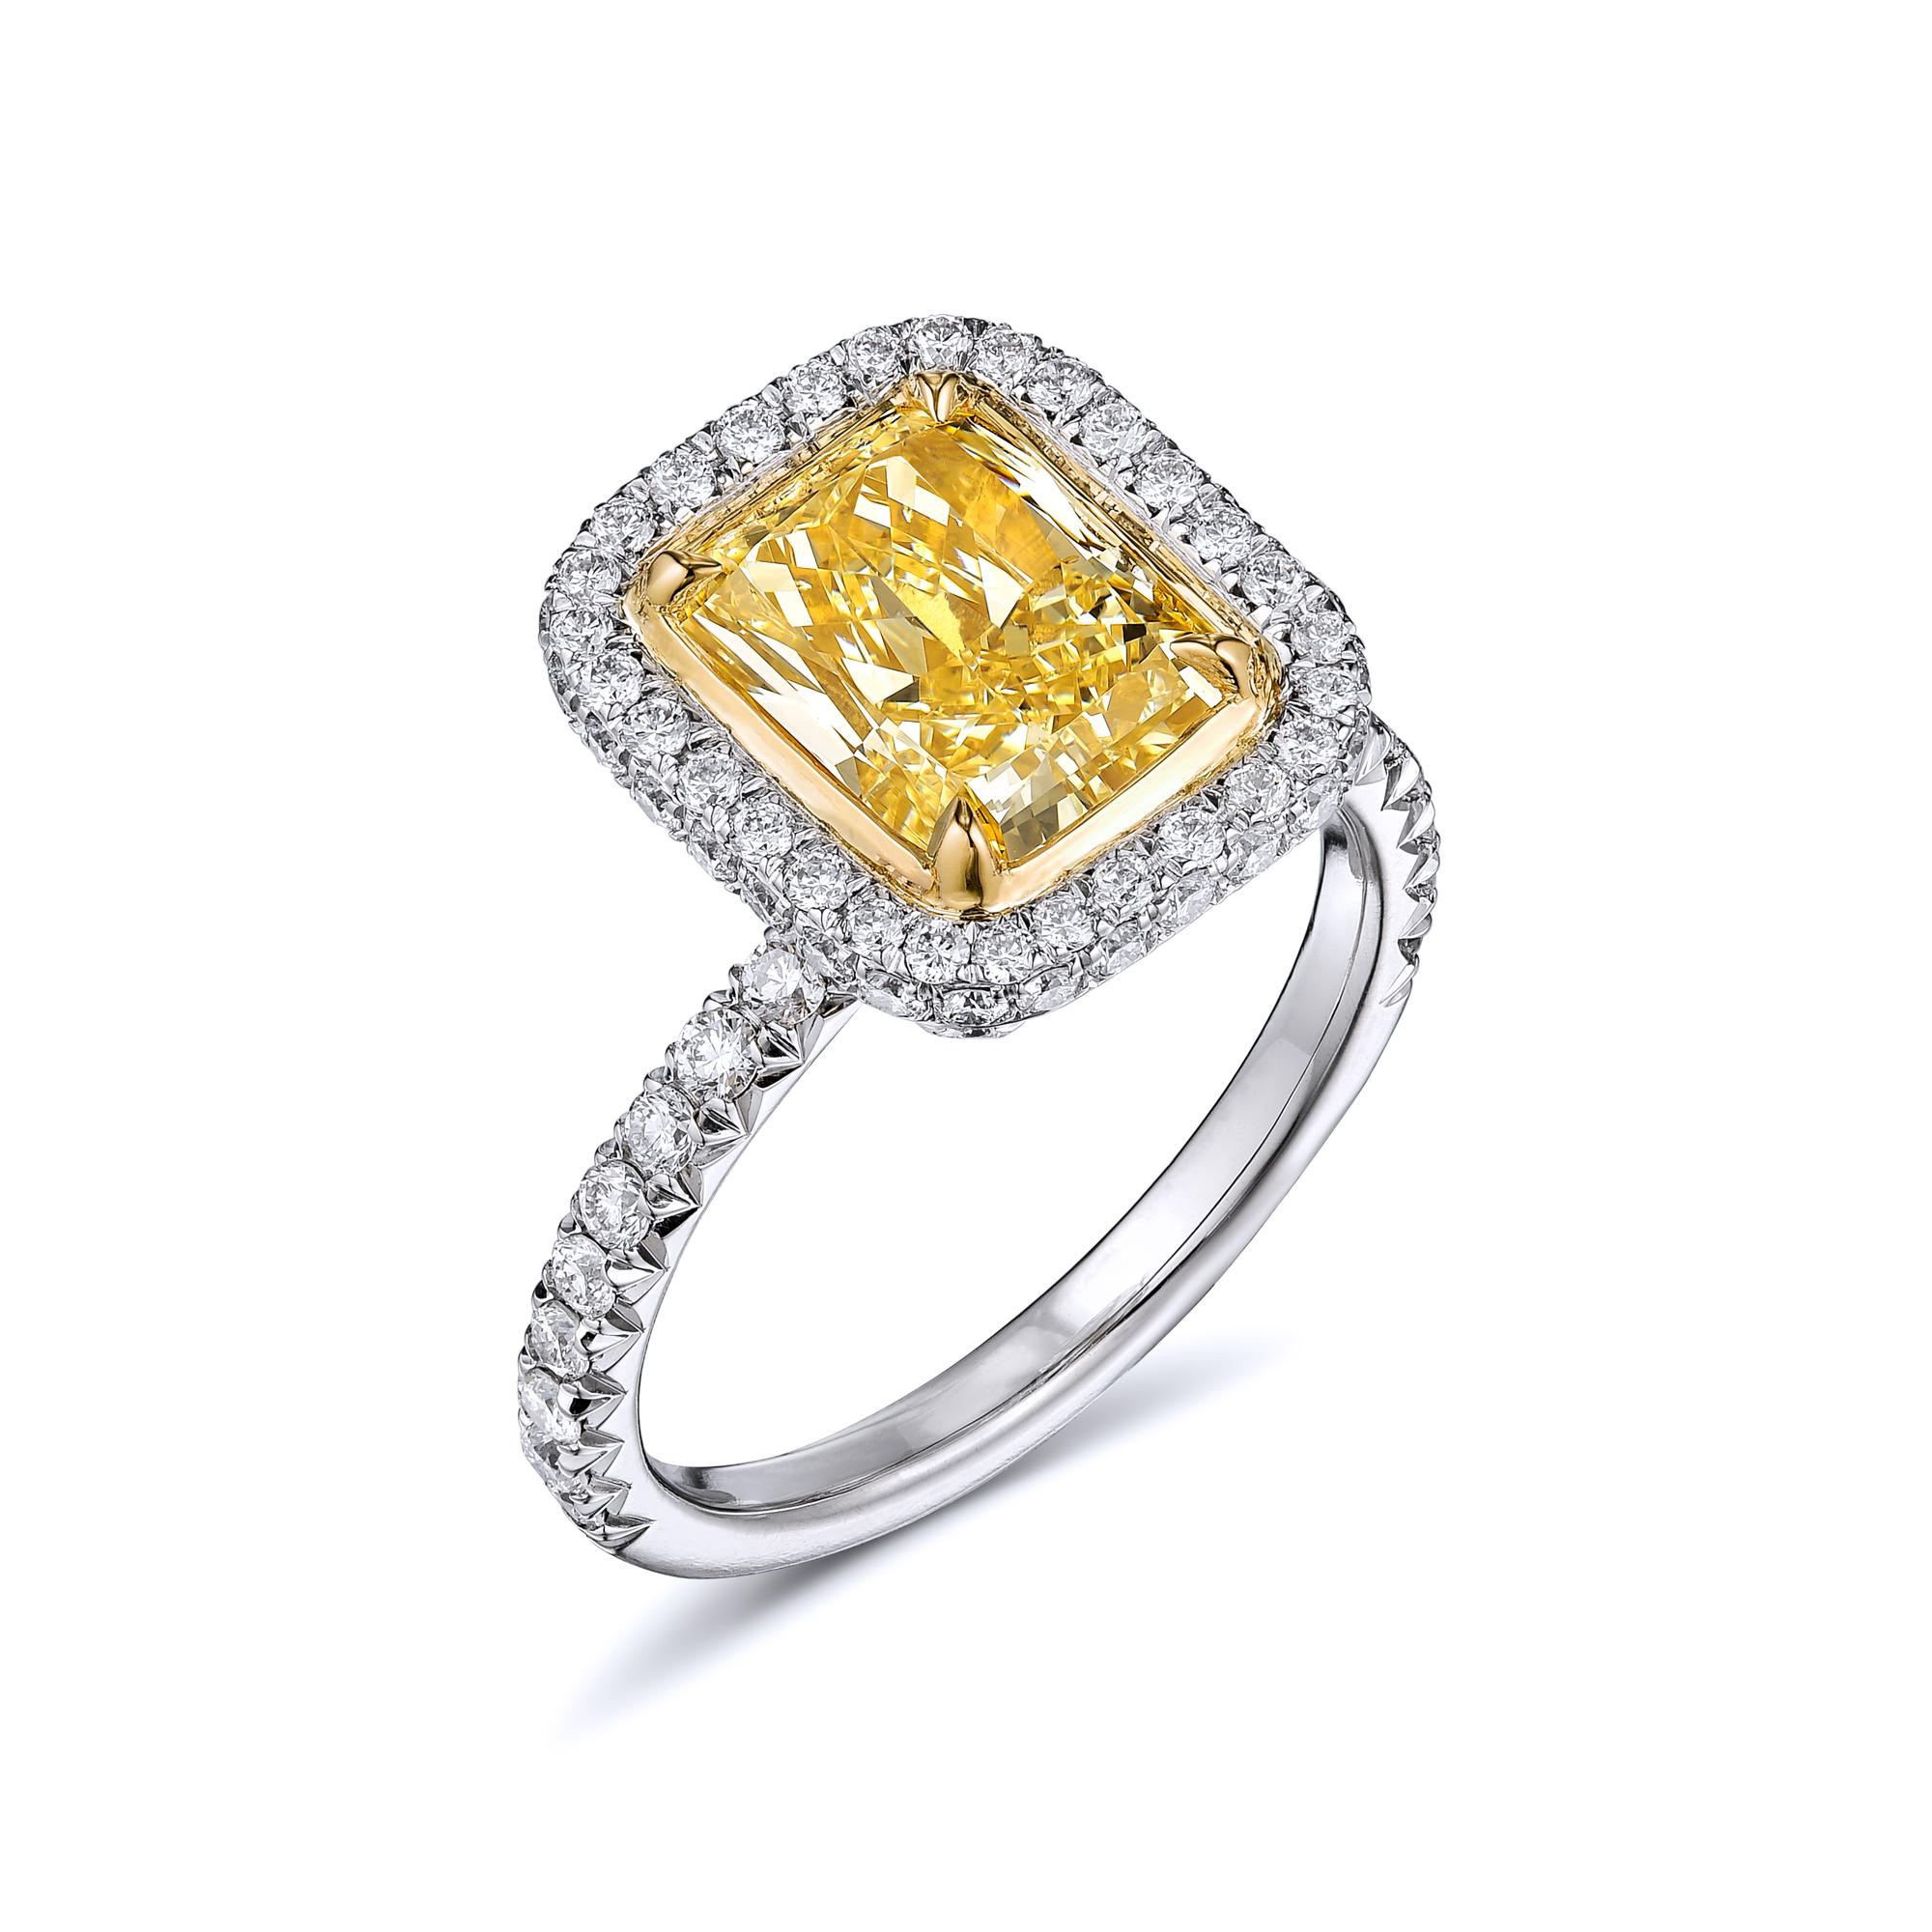 Fancy Yellow Diamond ring. Center stone: 2.55ct/ SI2 radiant cut fancy light yellow diamond. Side stones: 1.08ct /F-G VS2-SI1 Brilliant round diamonds. Total carat weight =3.63ct. Metal: Platinum, 18K yellow gold. Ring weight 6.6 grams. Ring size 5